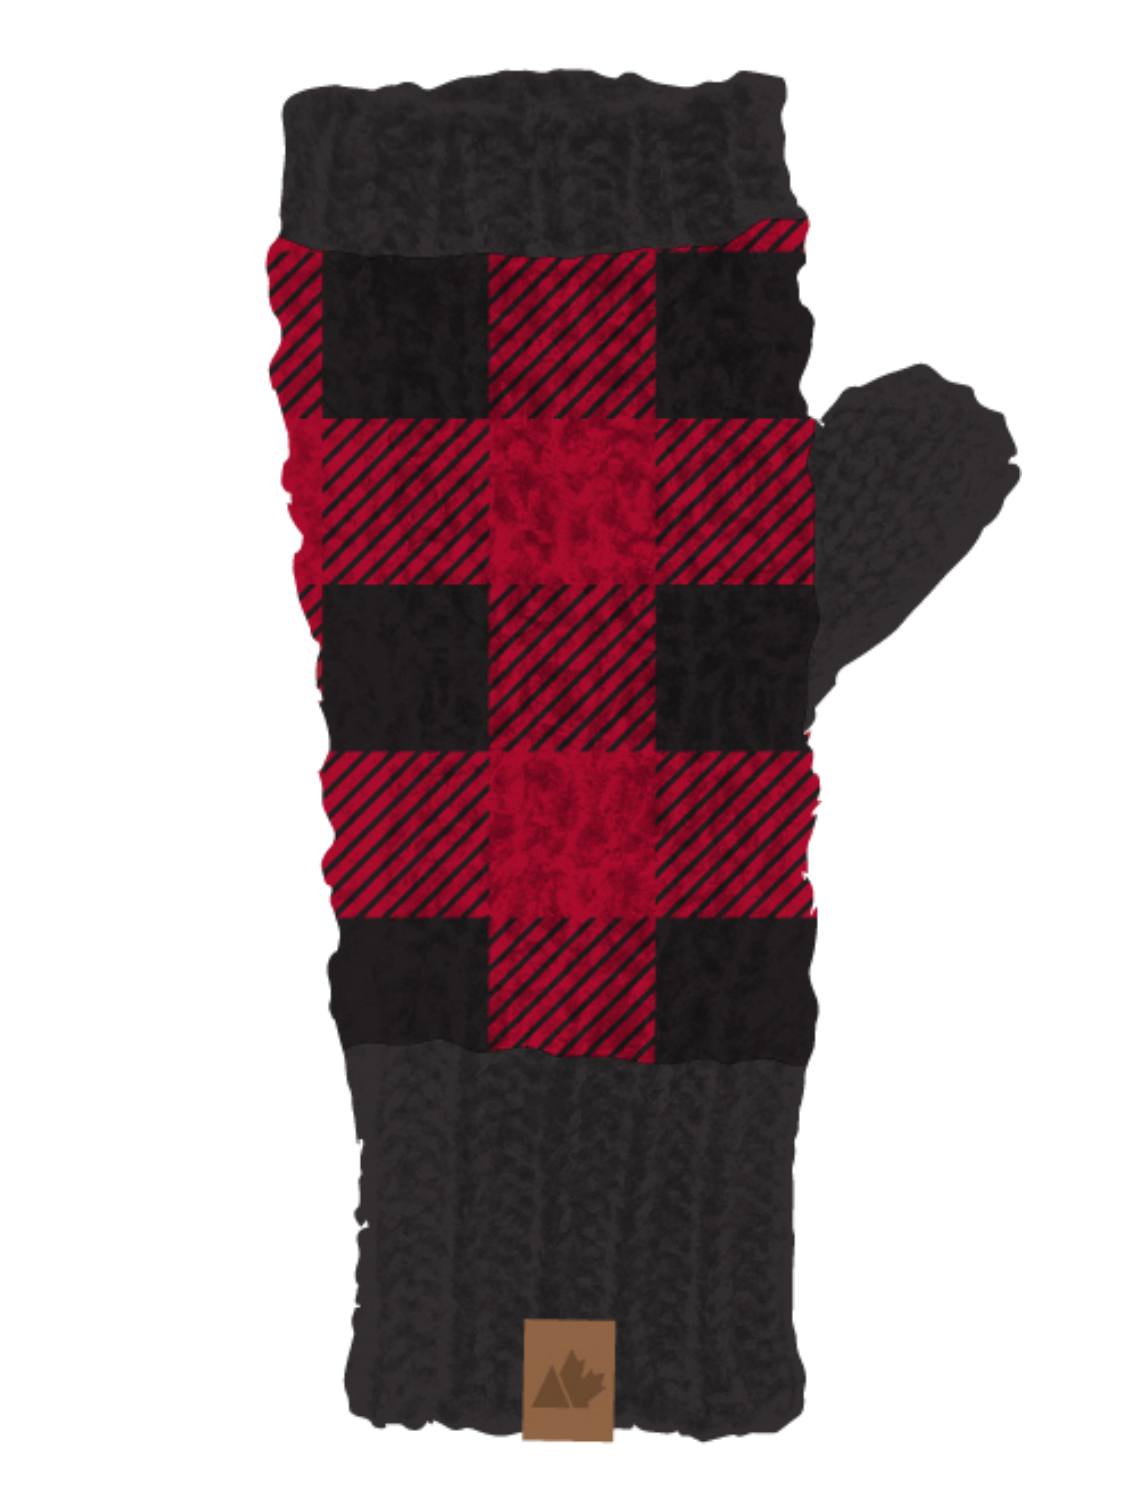 Great Northern Womens Red & Black Buffalo Plaid Fingerless Knit Gloves Tech Text